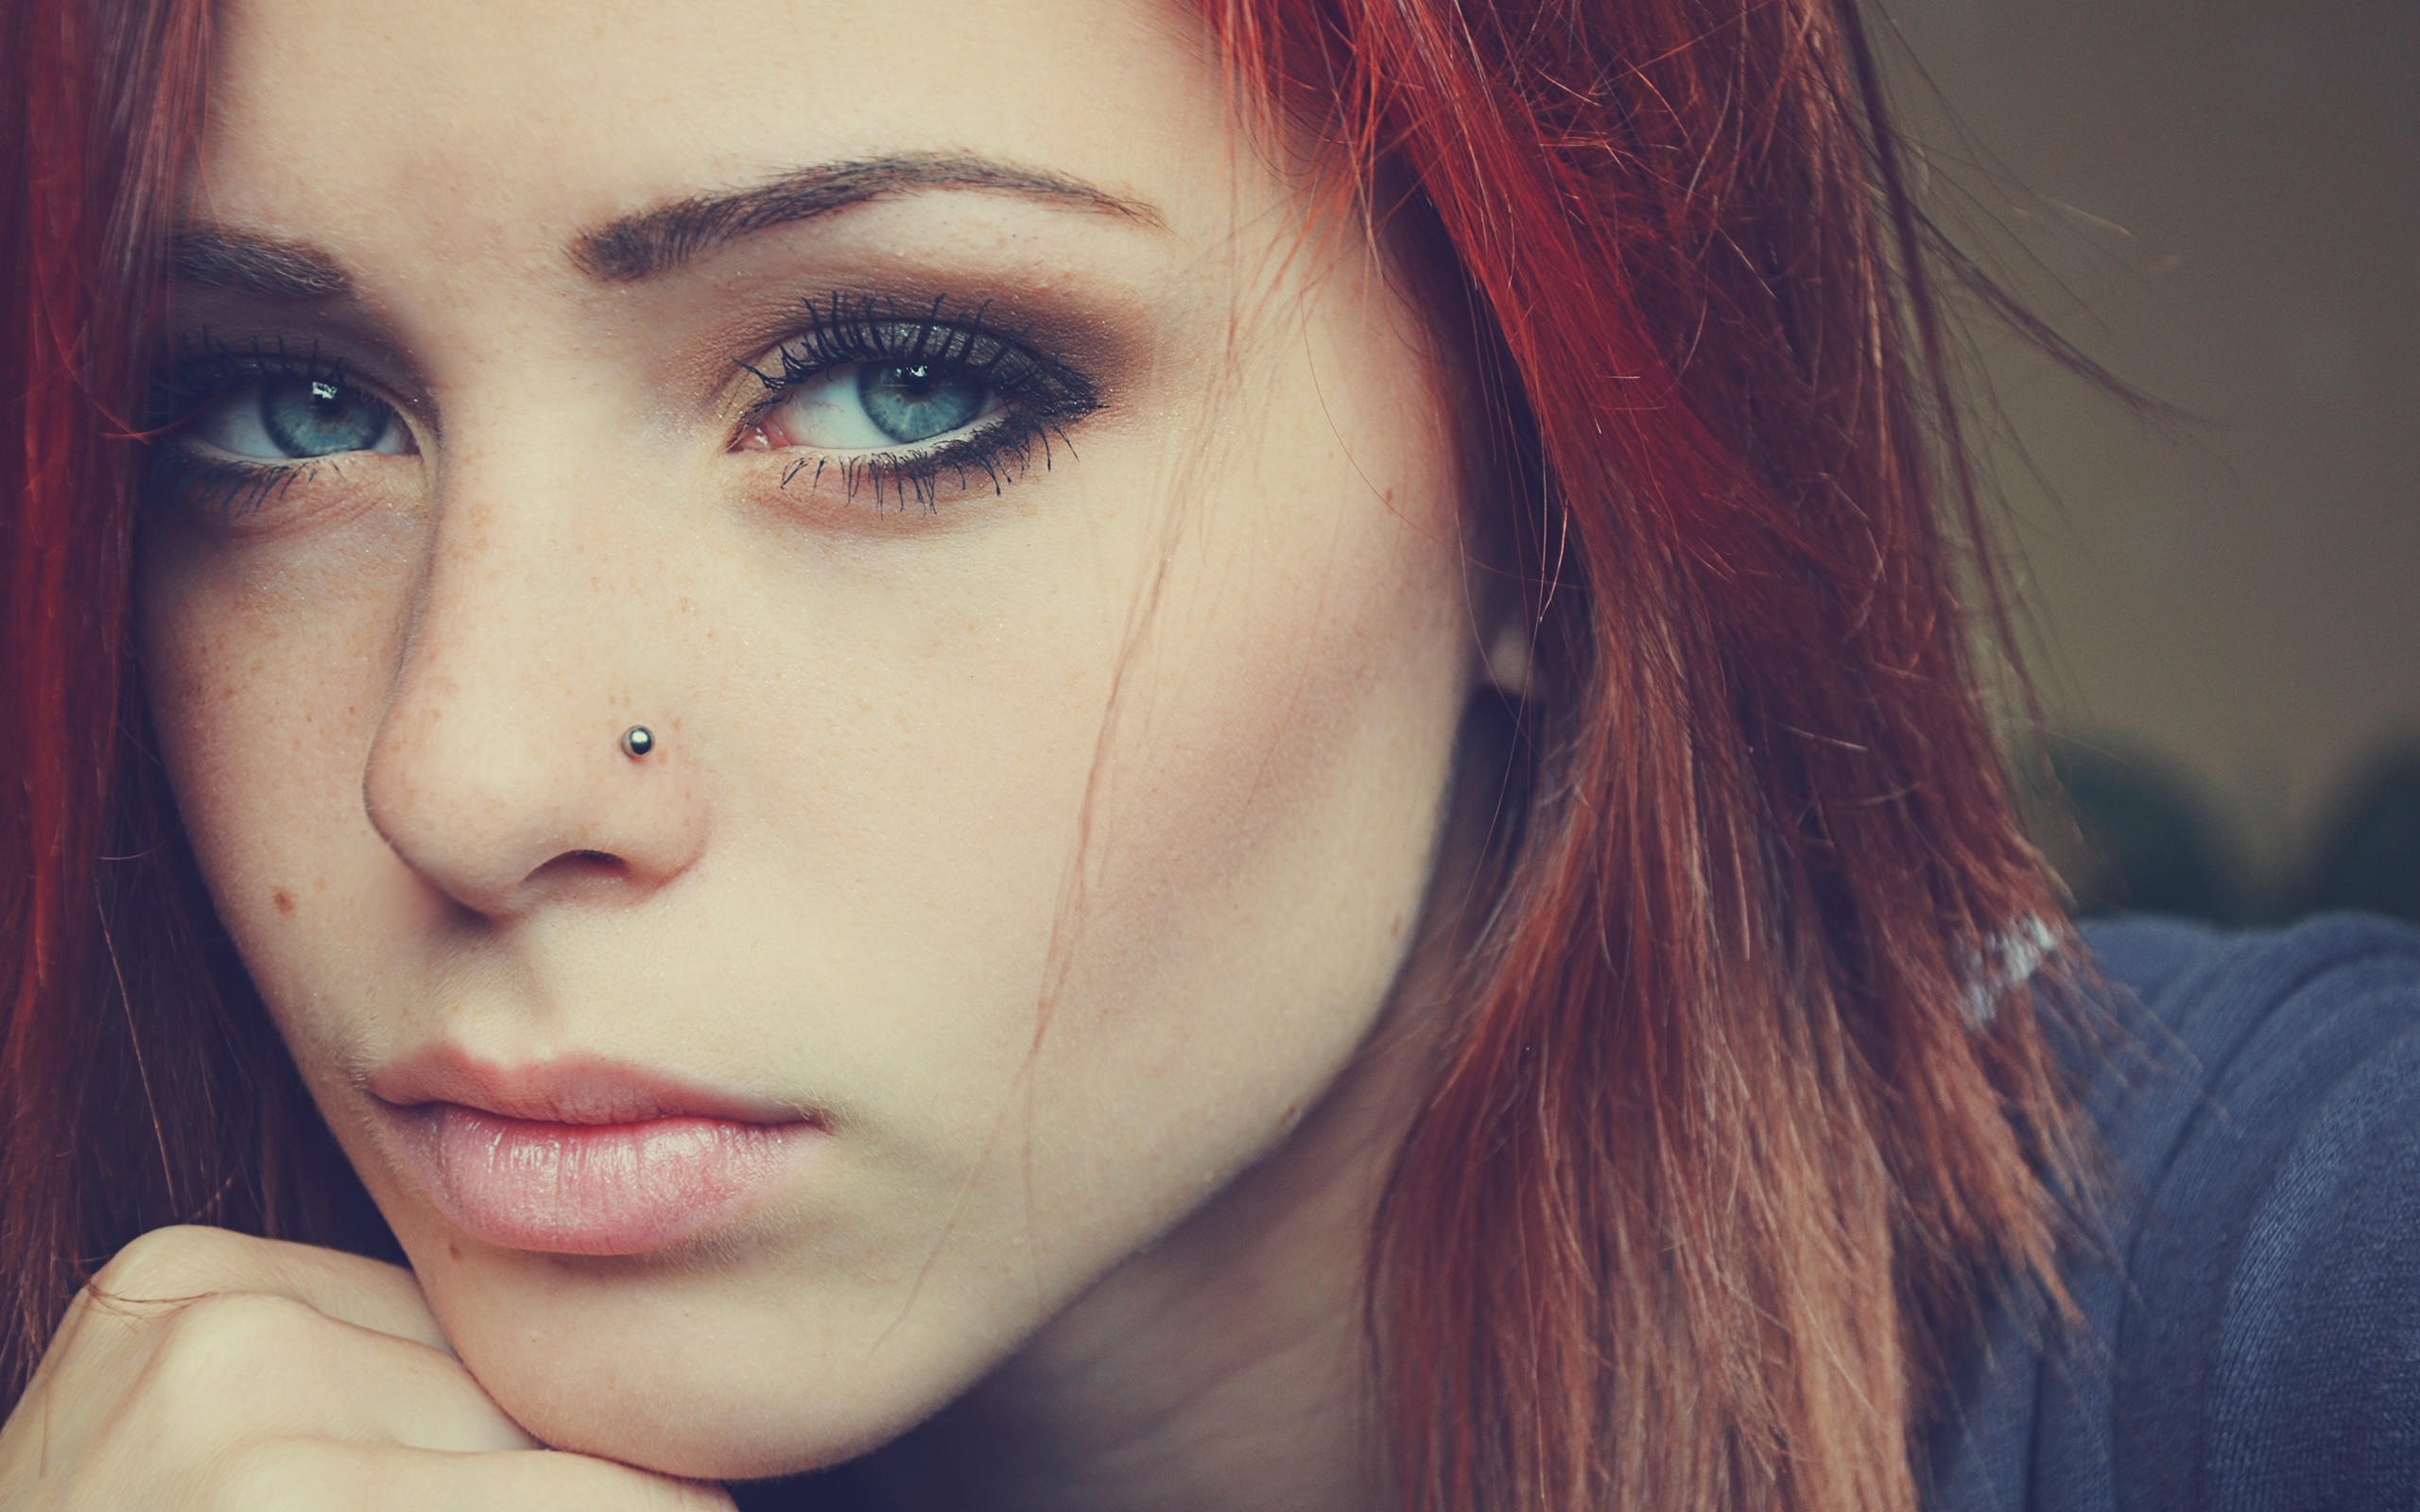 The redhead with the nose piercing.